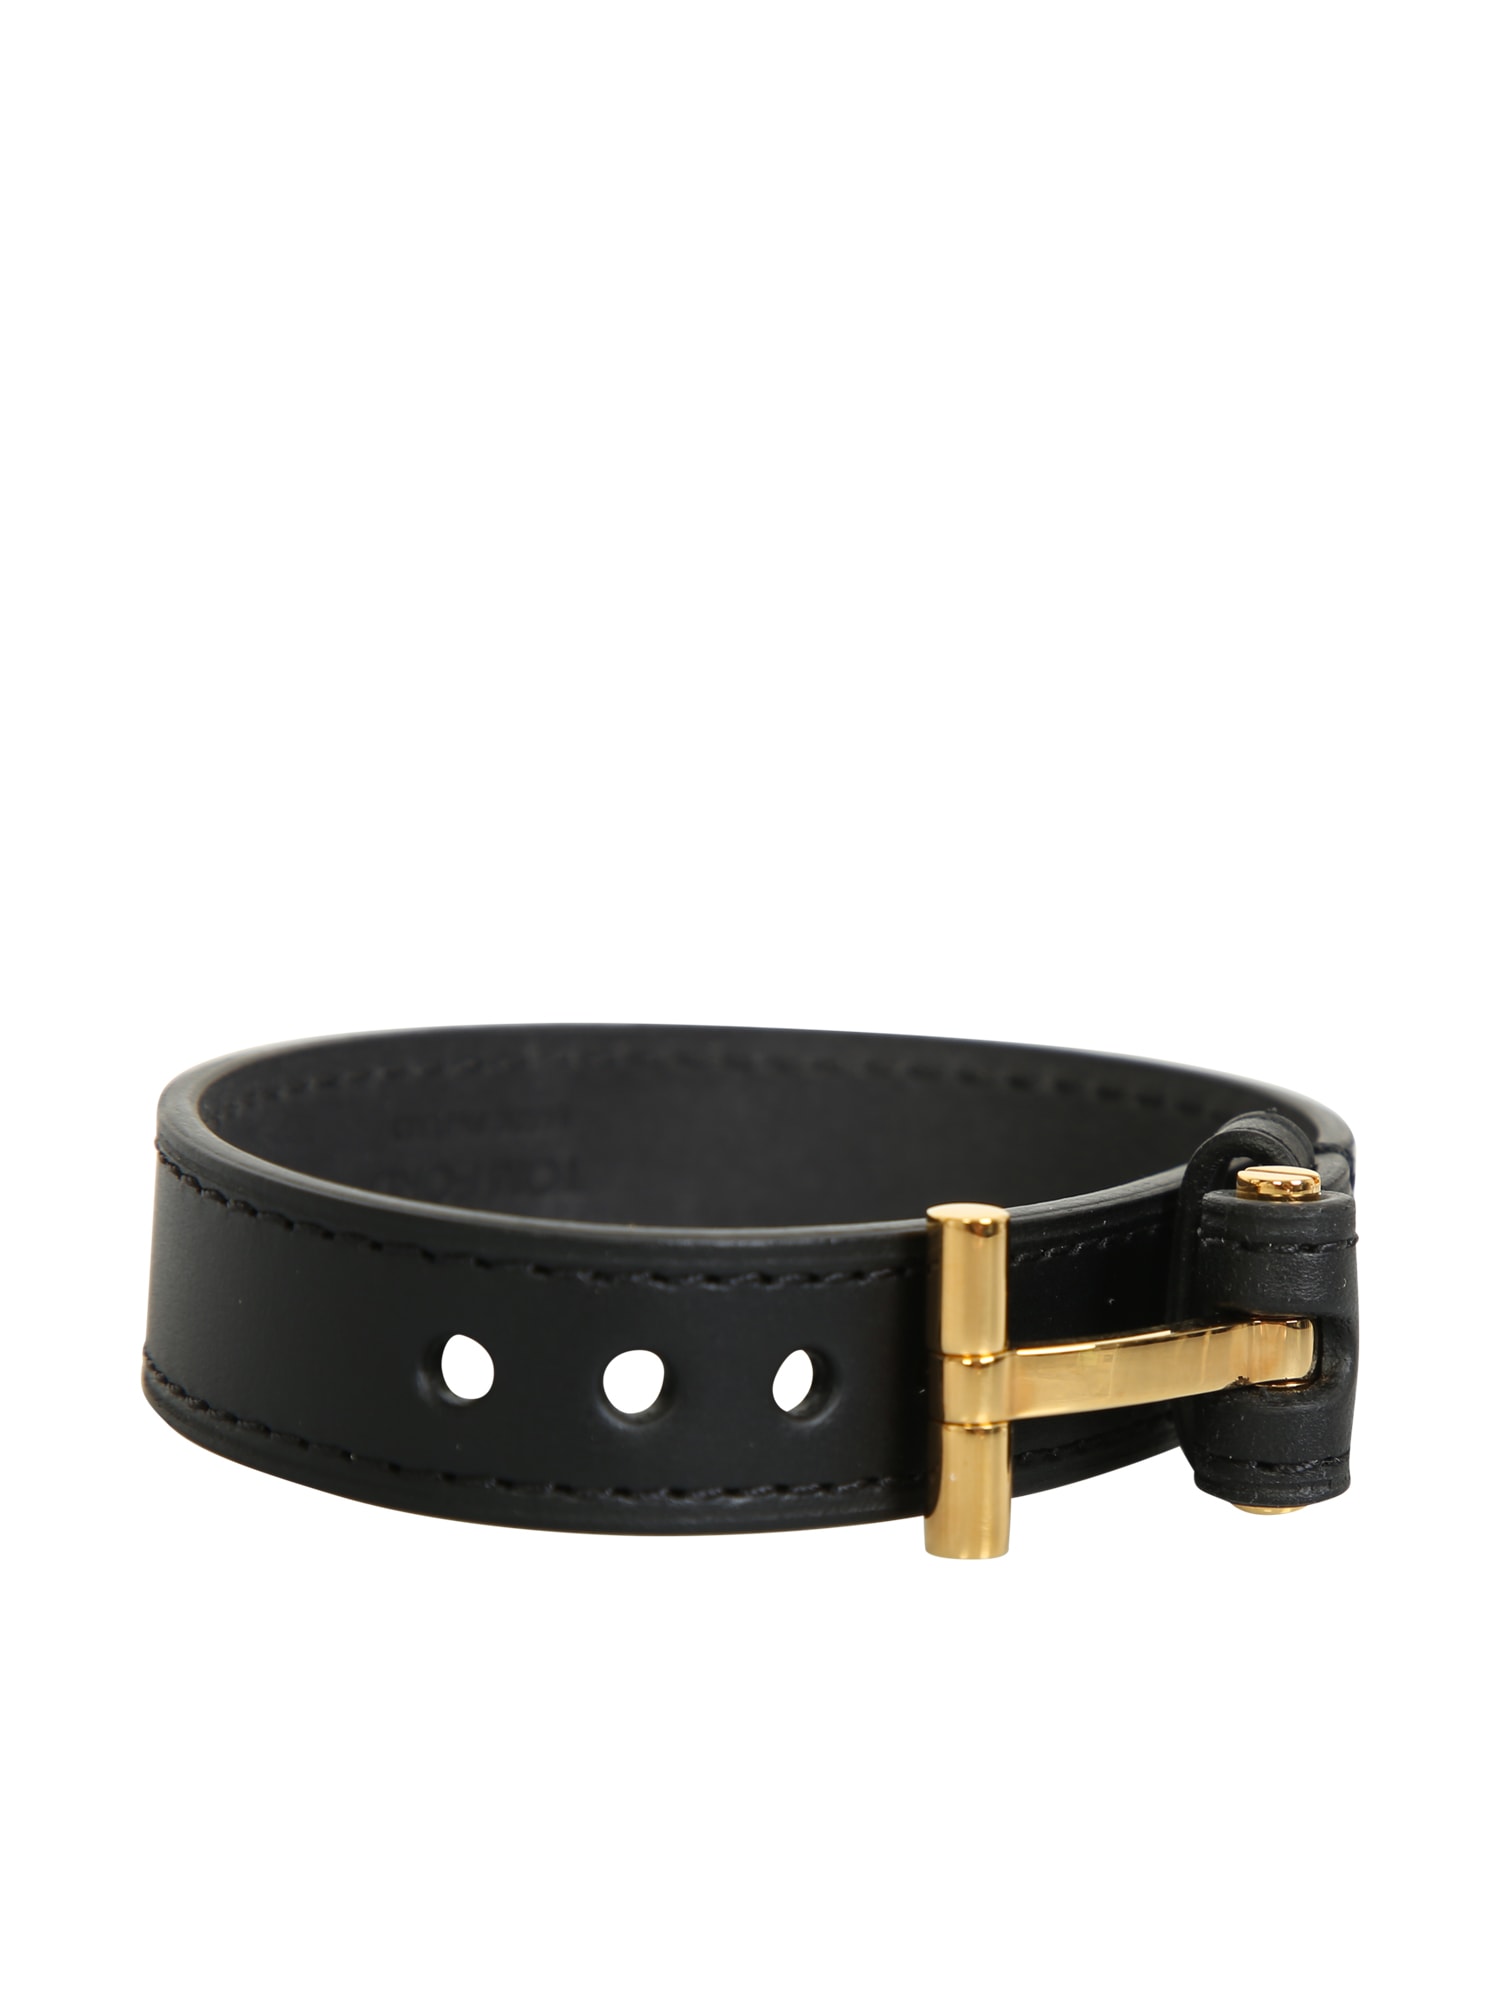 Tom Ford T-clasp Bracelet. Essential Accessory To Make The Look